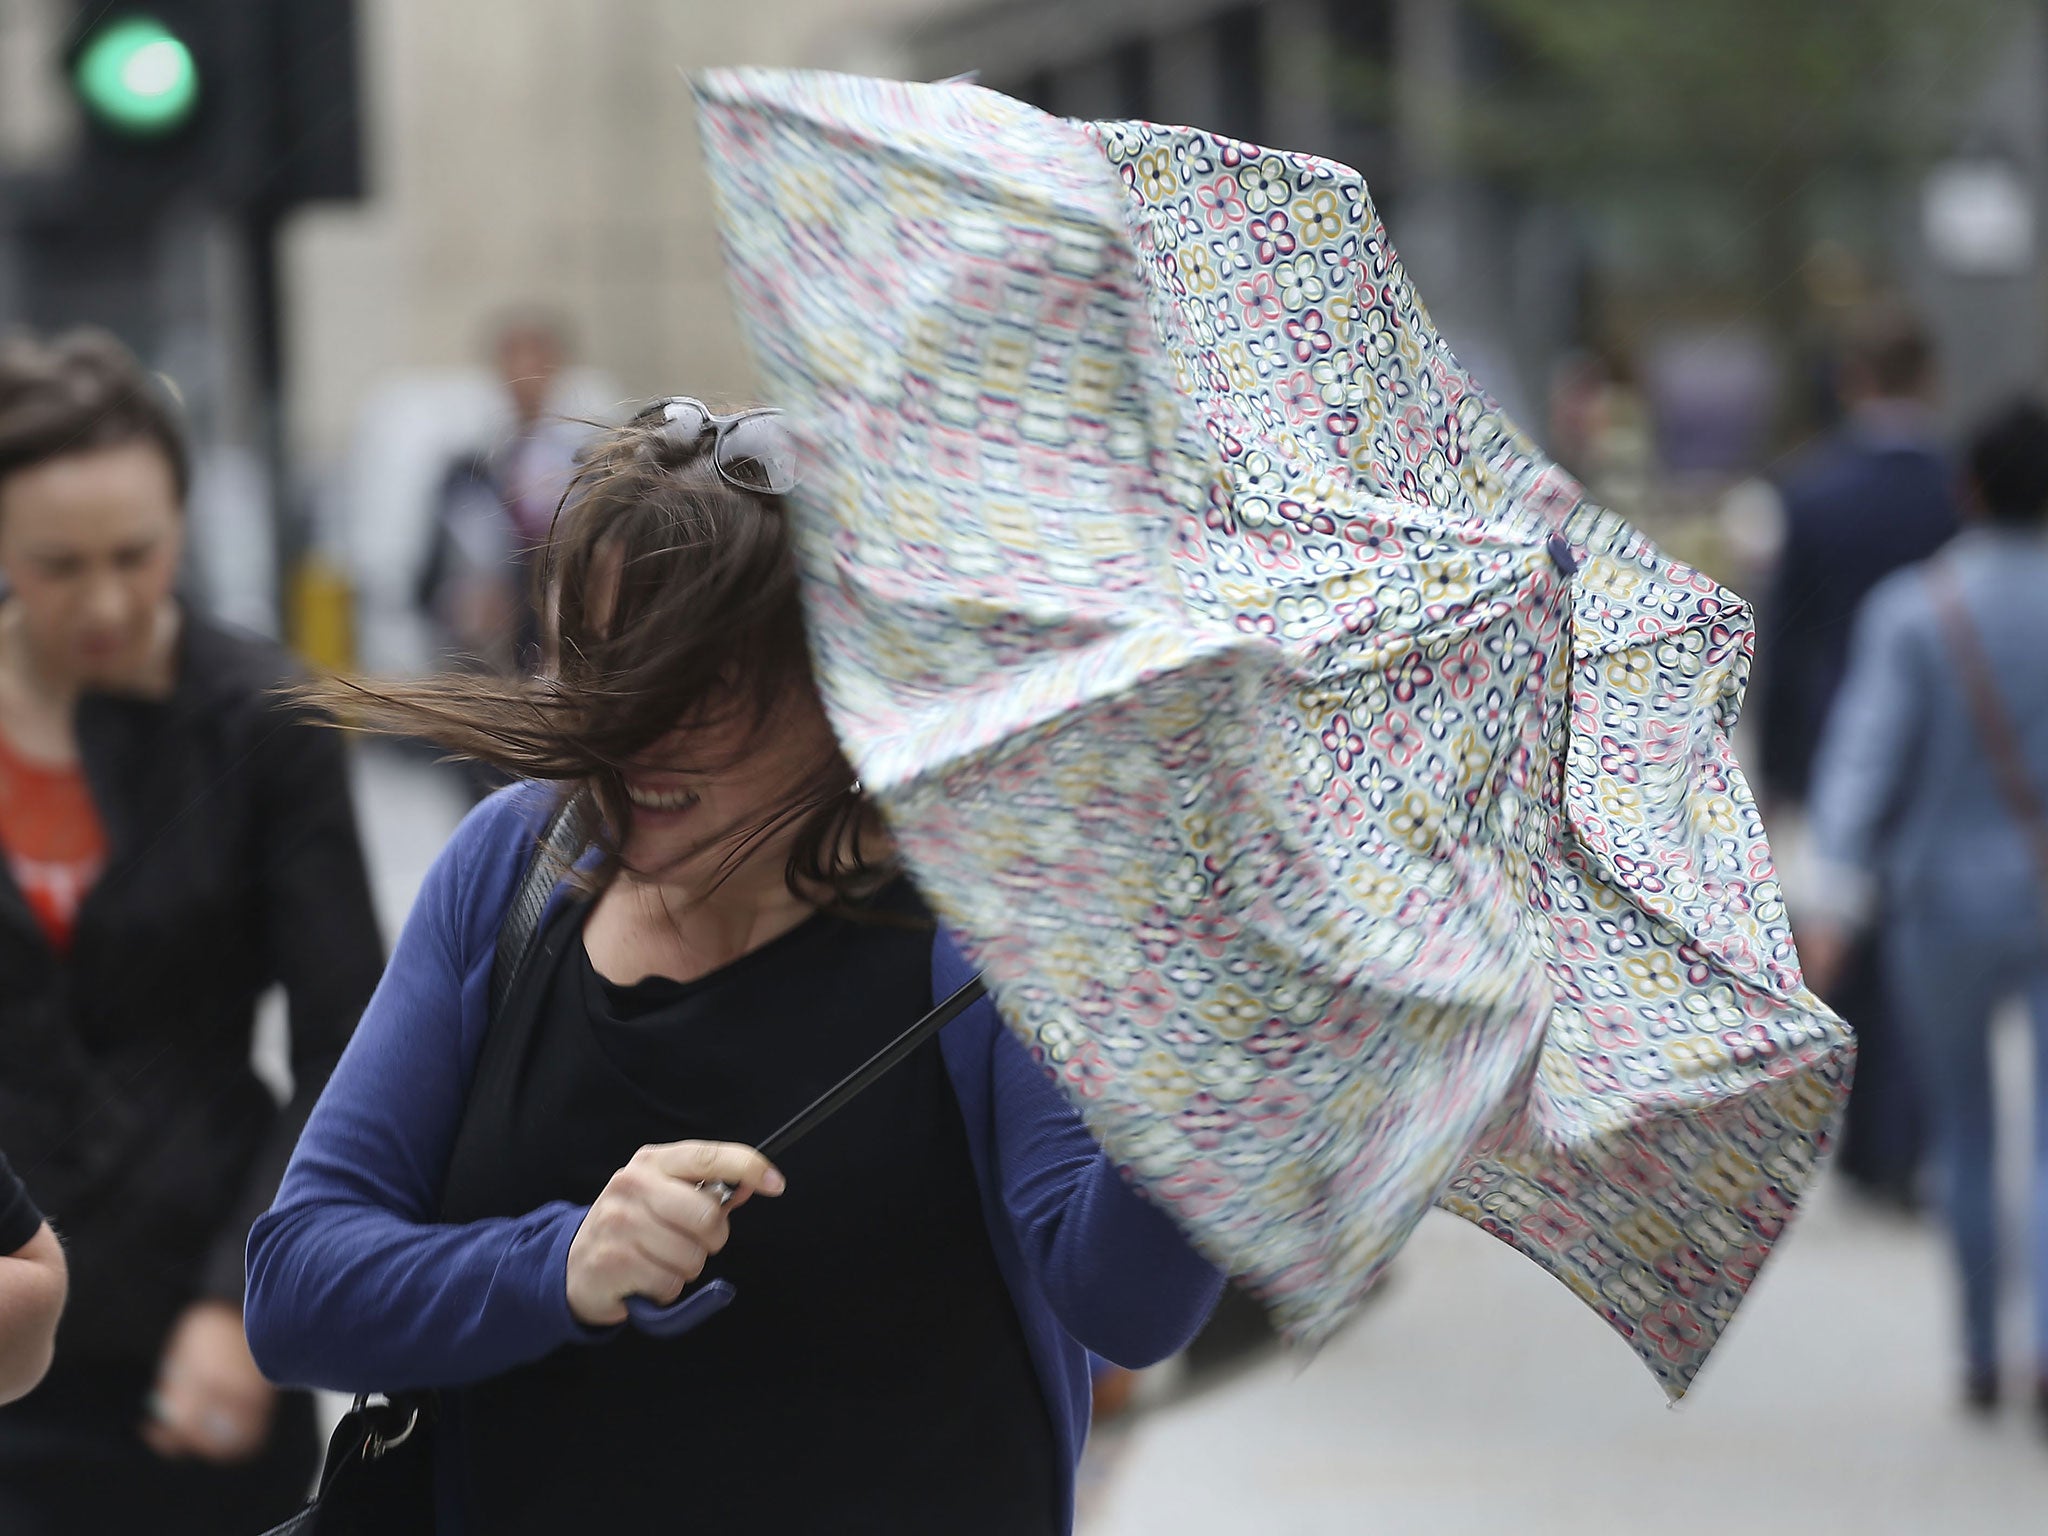 The weather is set to become unseasonable this week